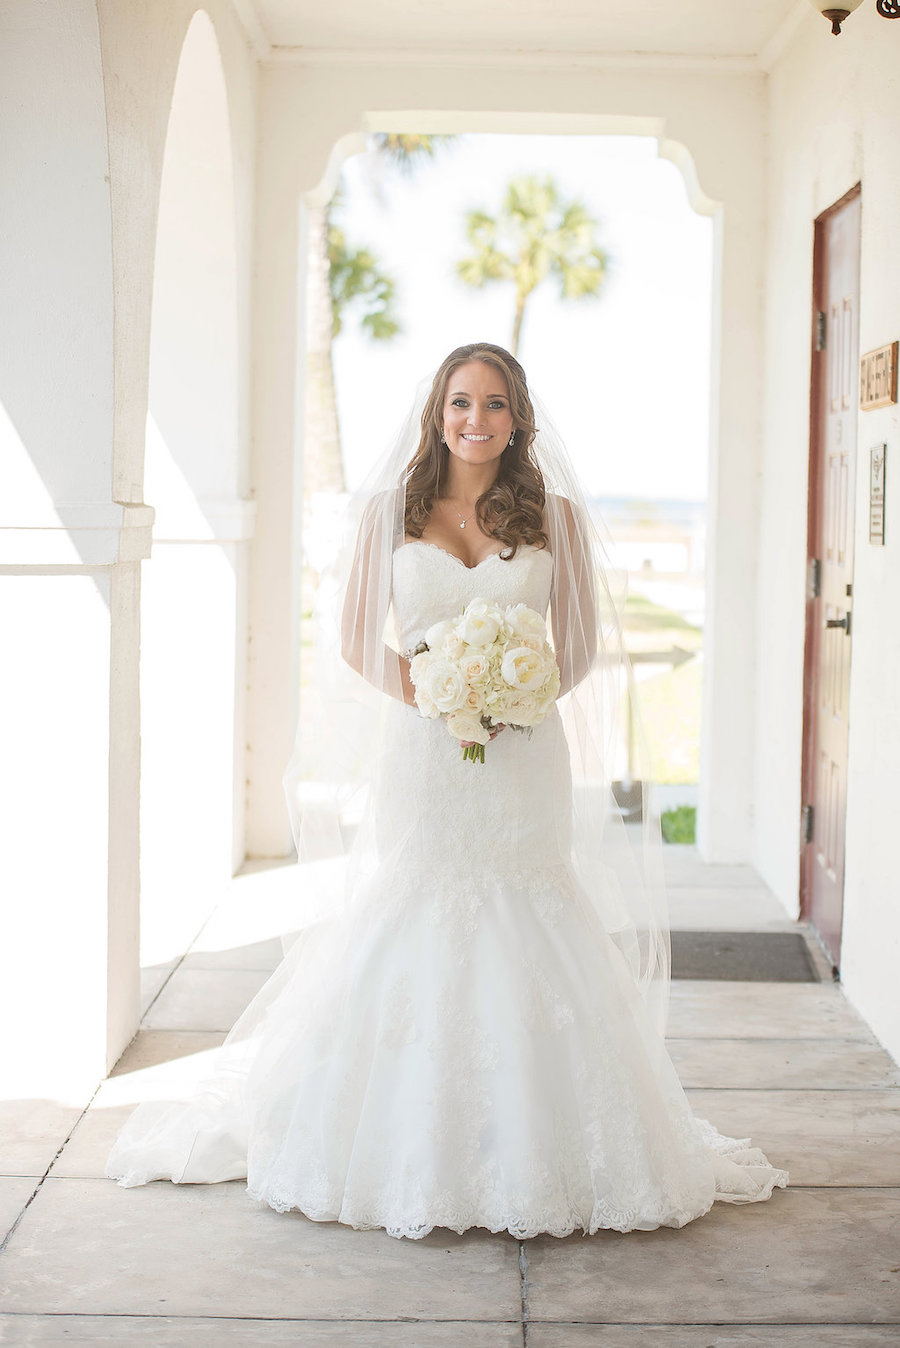 Bridal Wedding Day Portrait in Cream Lace Trumpet Style Wedding Dress with Cathedral Veil | St. Petersburg Wedding Photographer Kristen Marie Photography